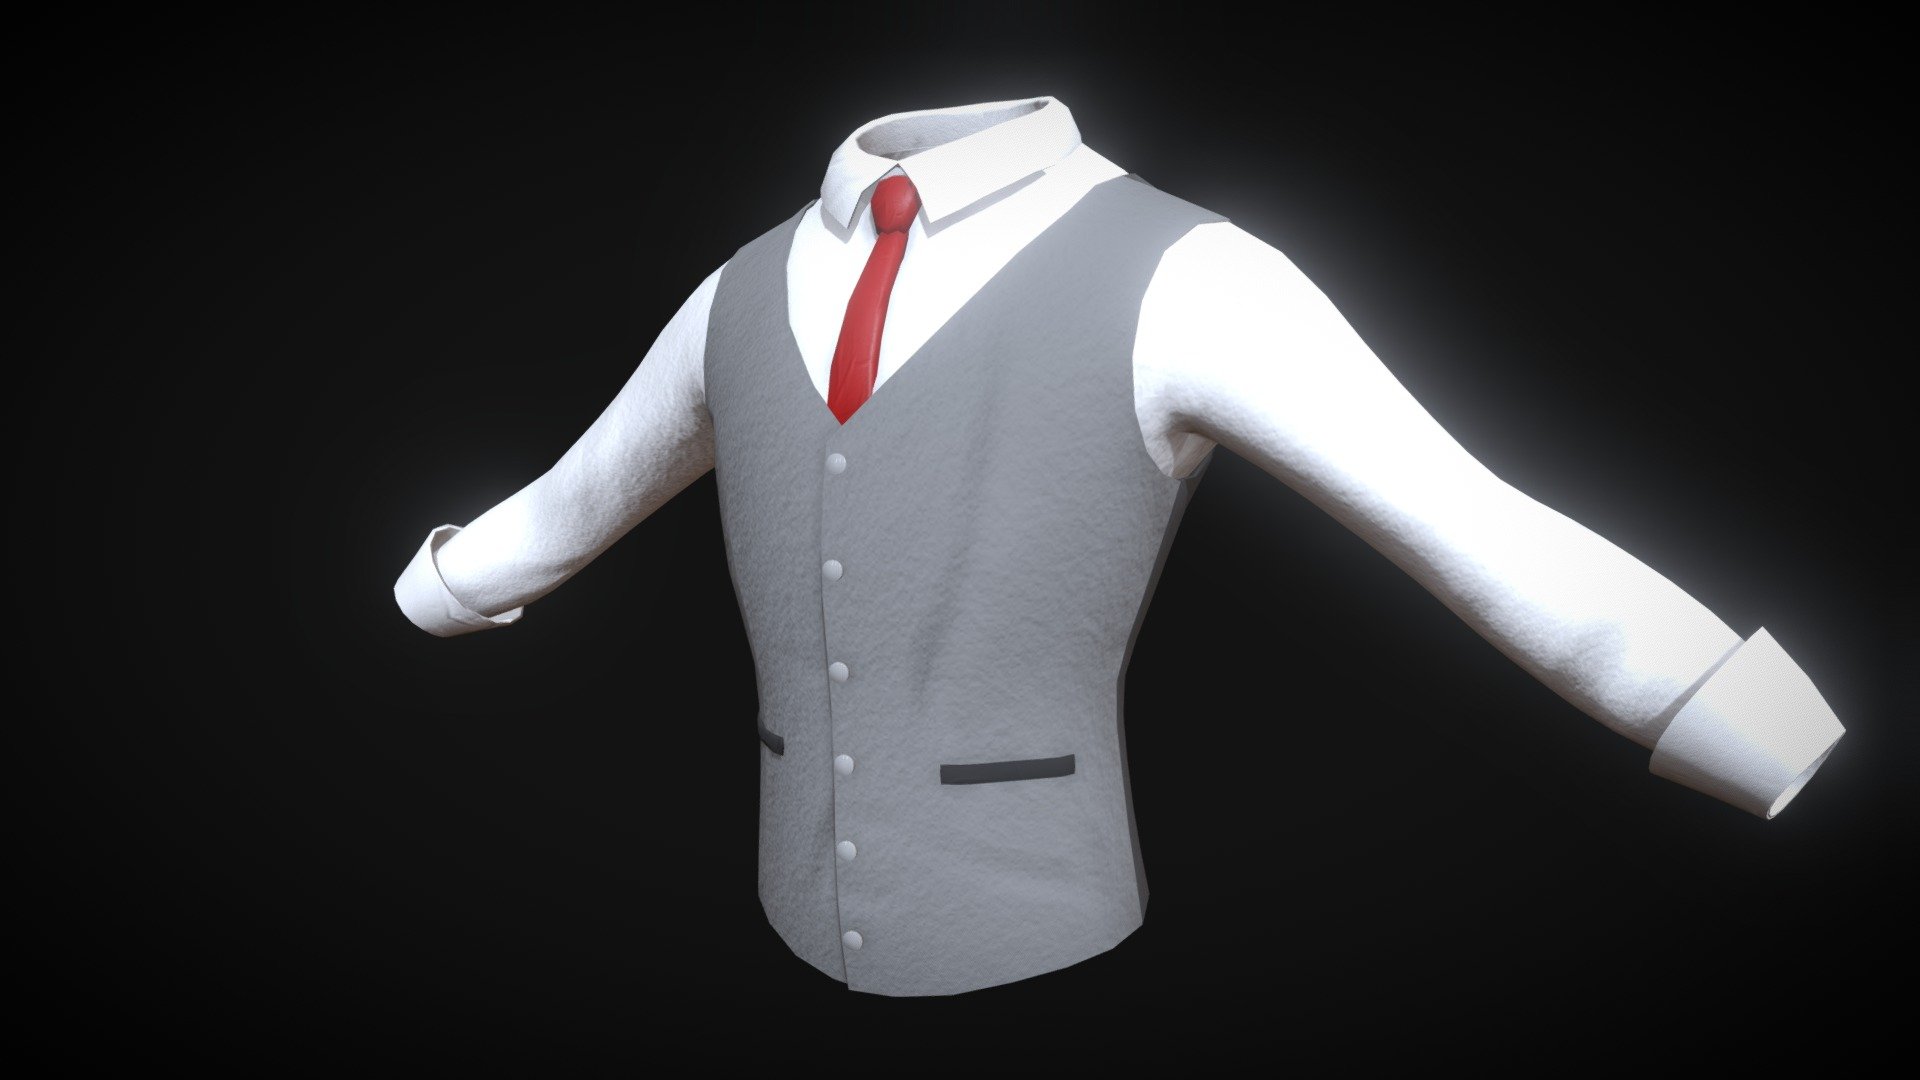 Shirt And Vest low poly redy for game characters.
made by silo 2021.
no texture just normal map 3d model